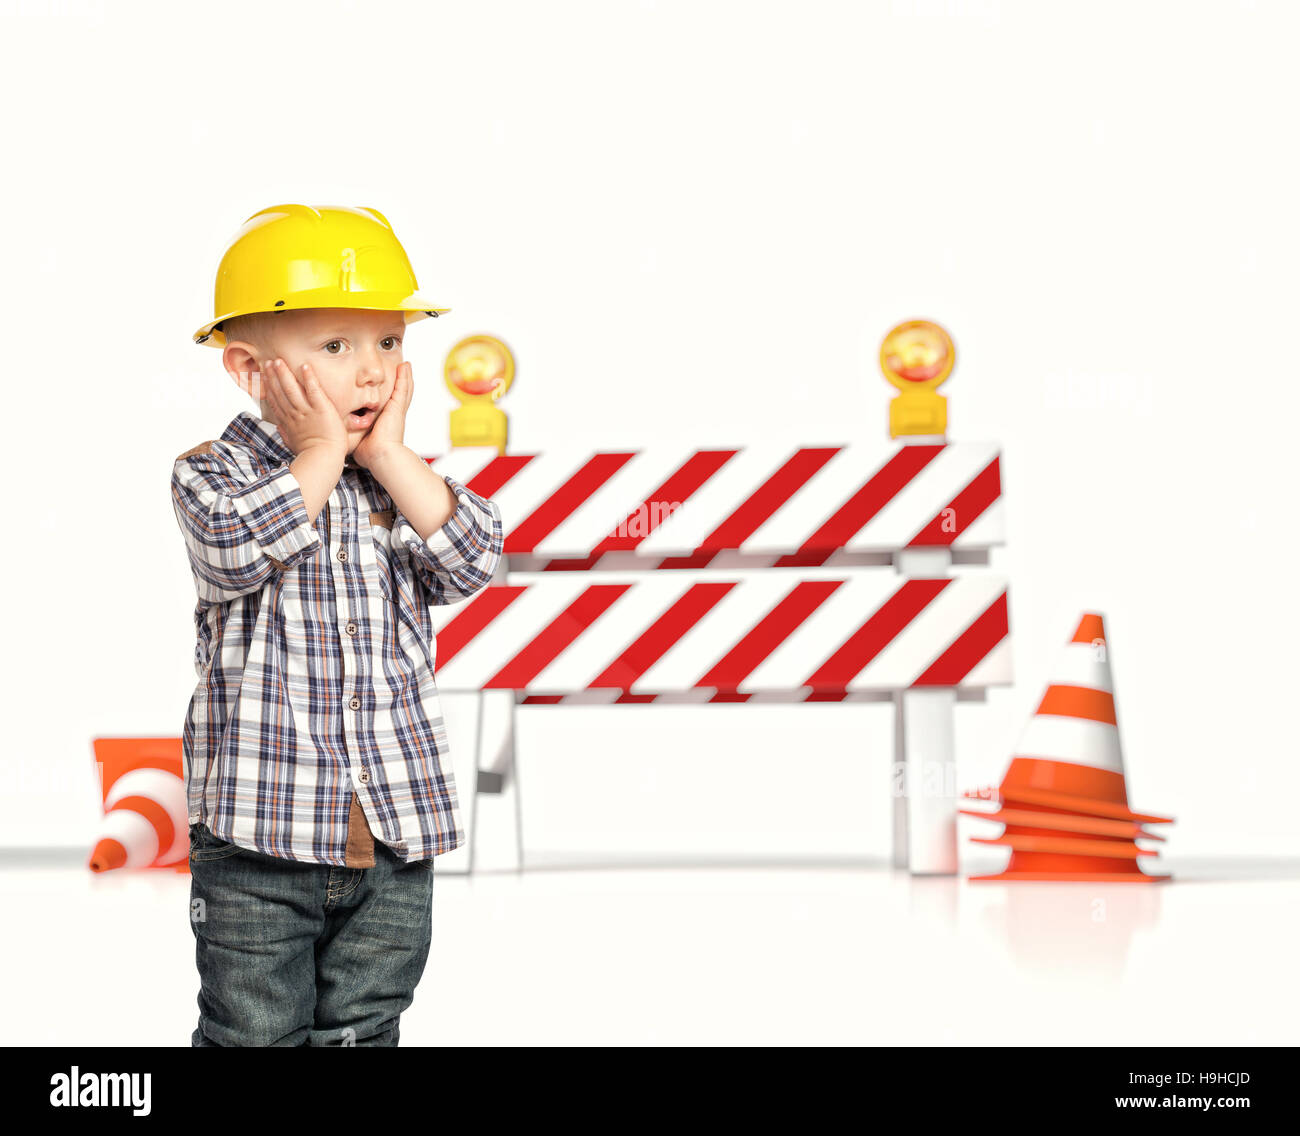 traffic barrier 3d and handyman child Stock Photo